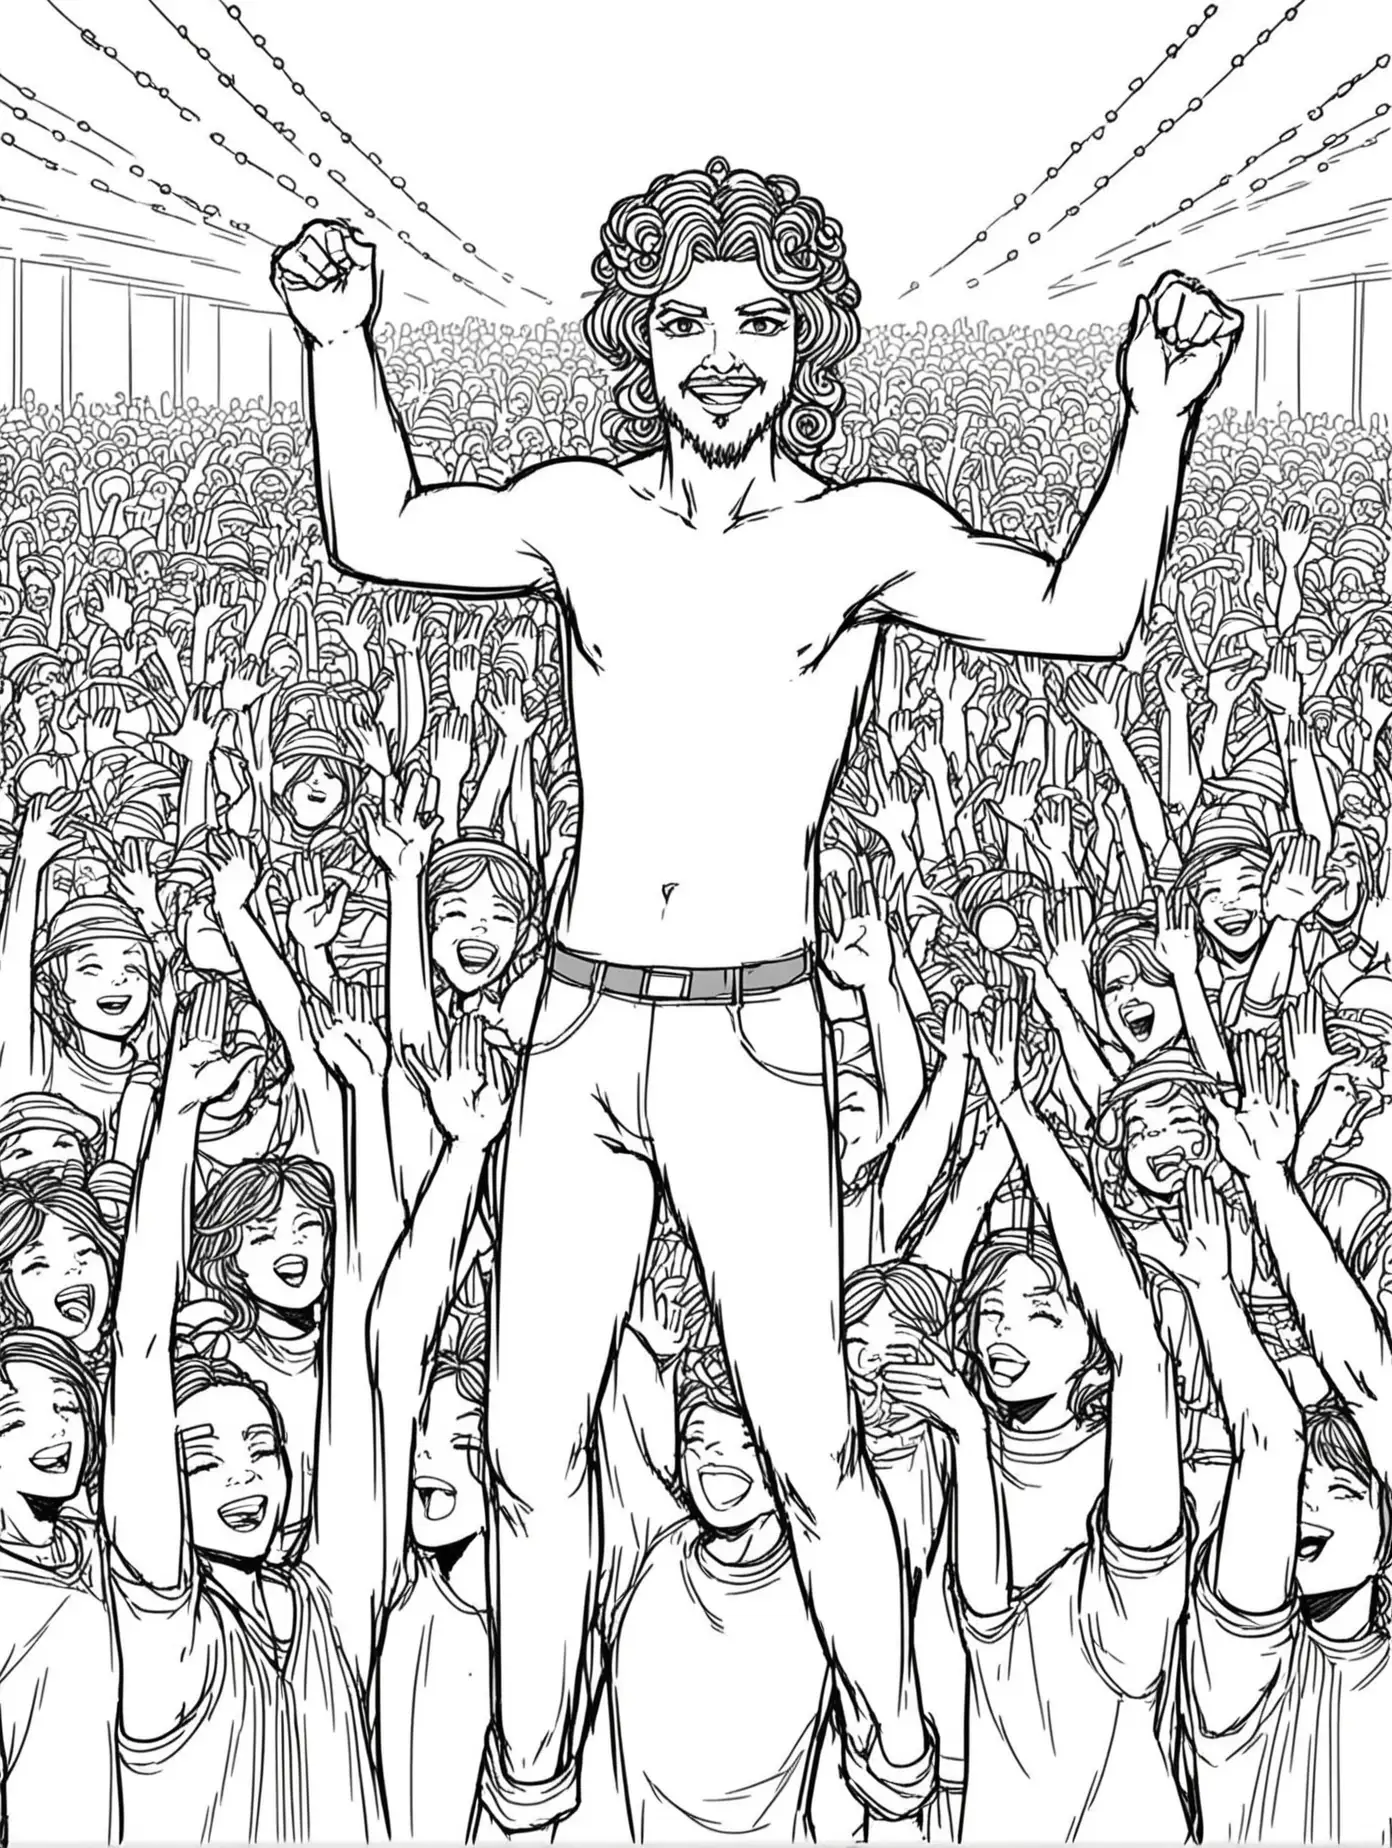 Dionysus Clubbing at Techno Party Coloring Page for Kids